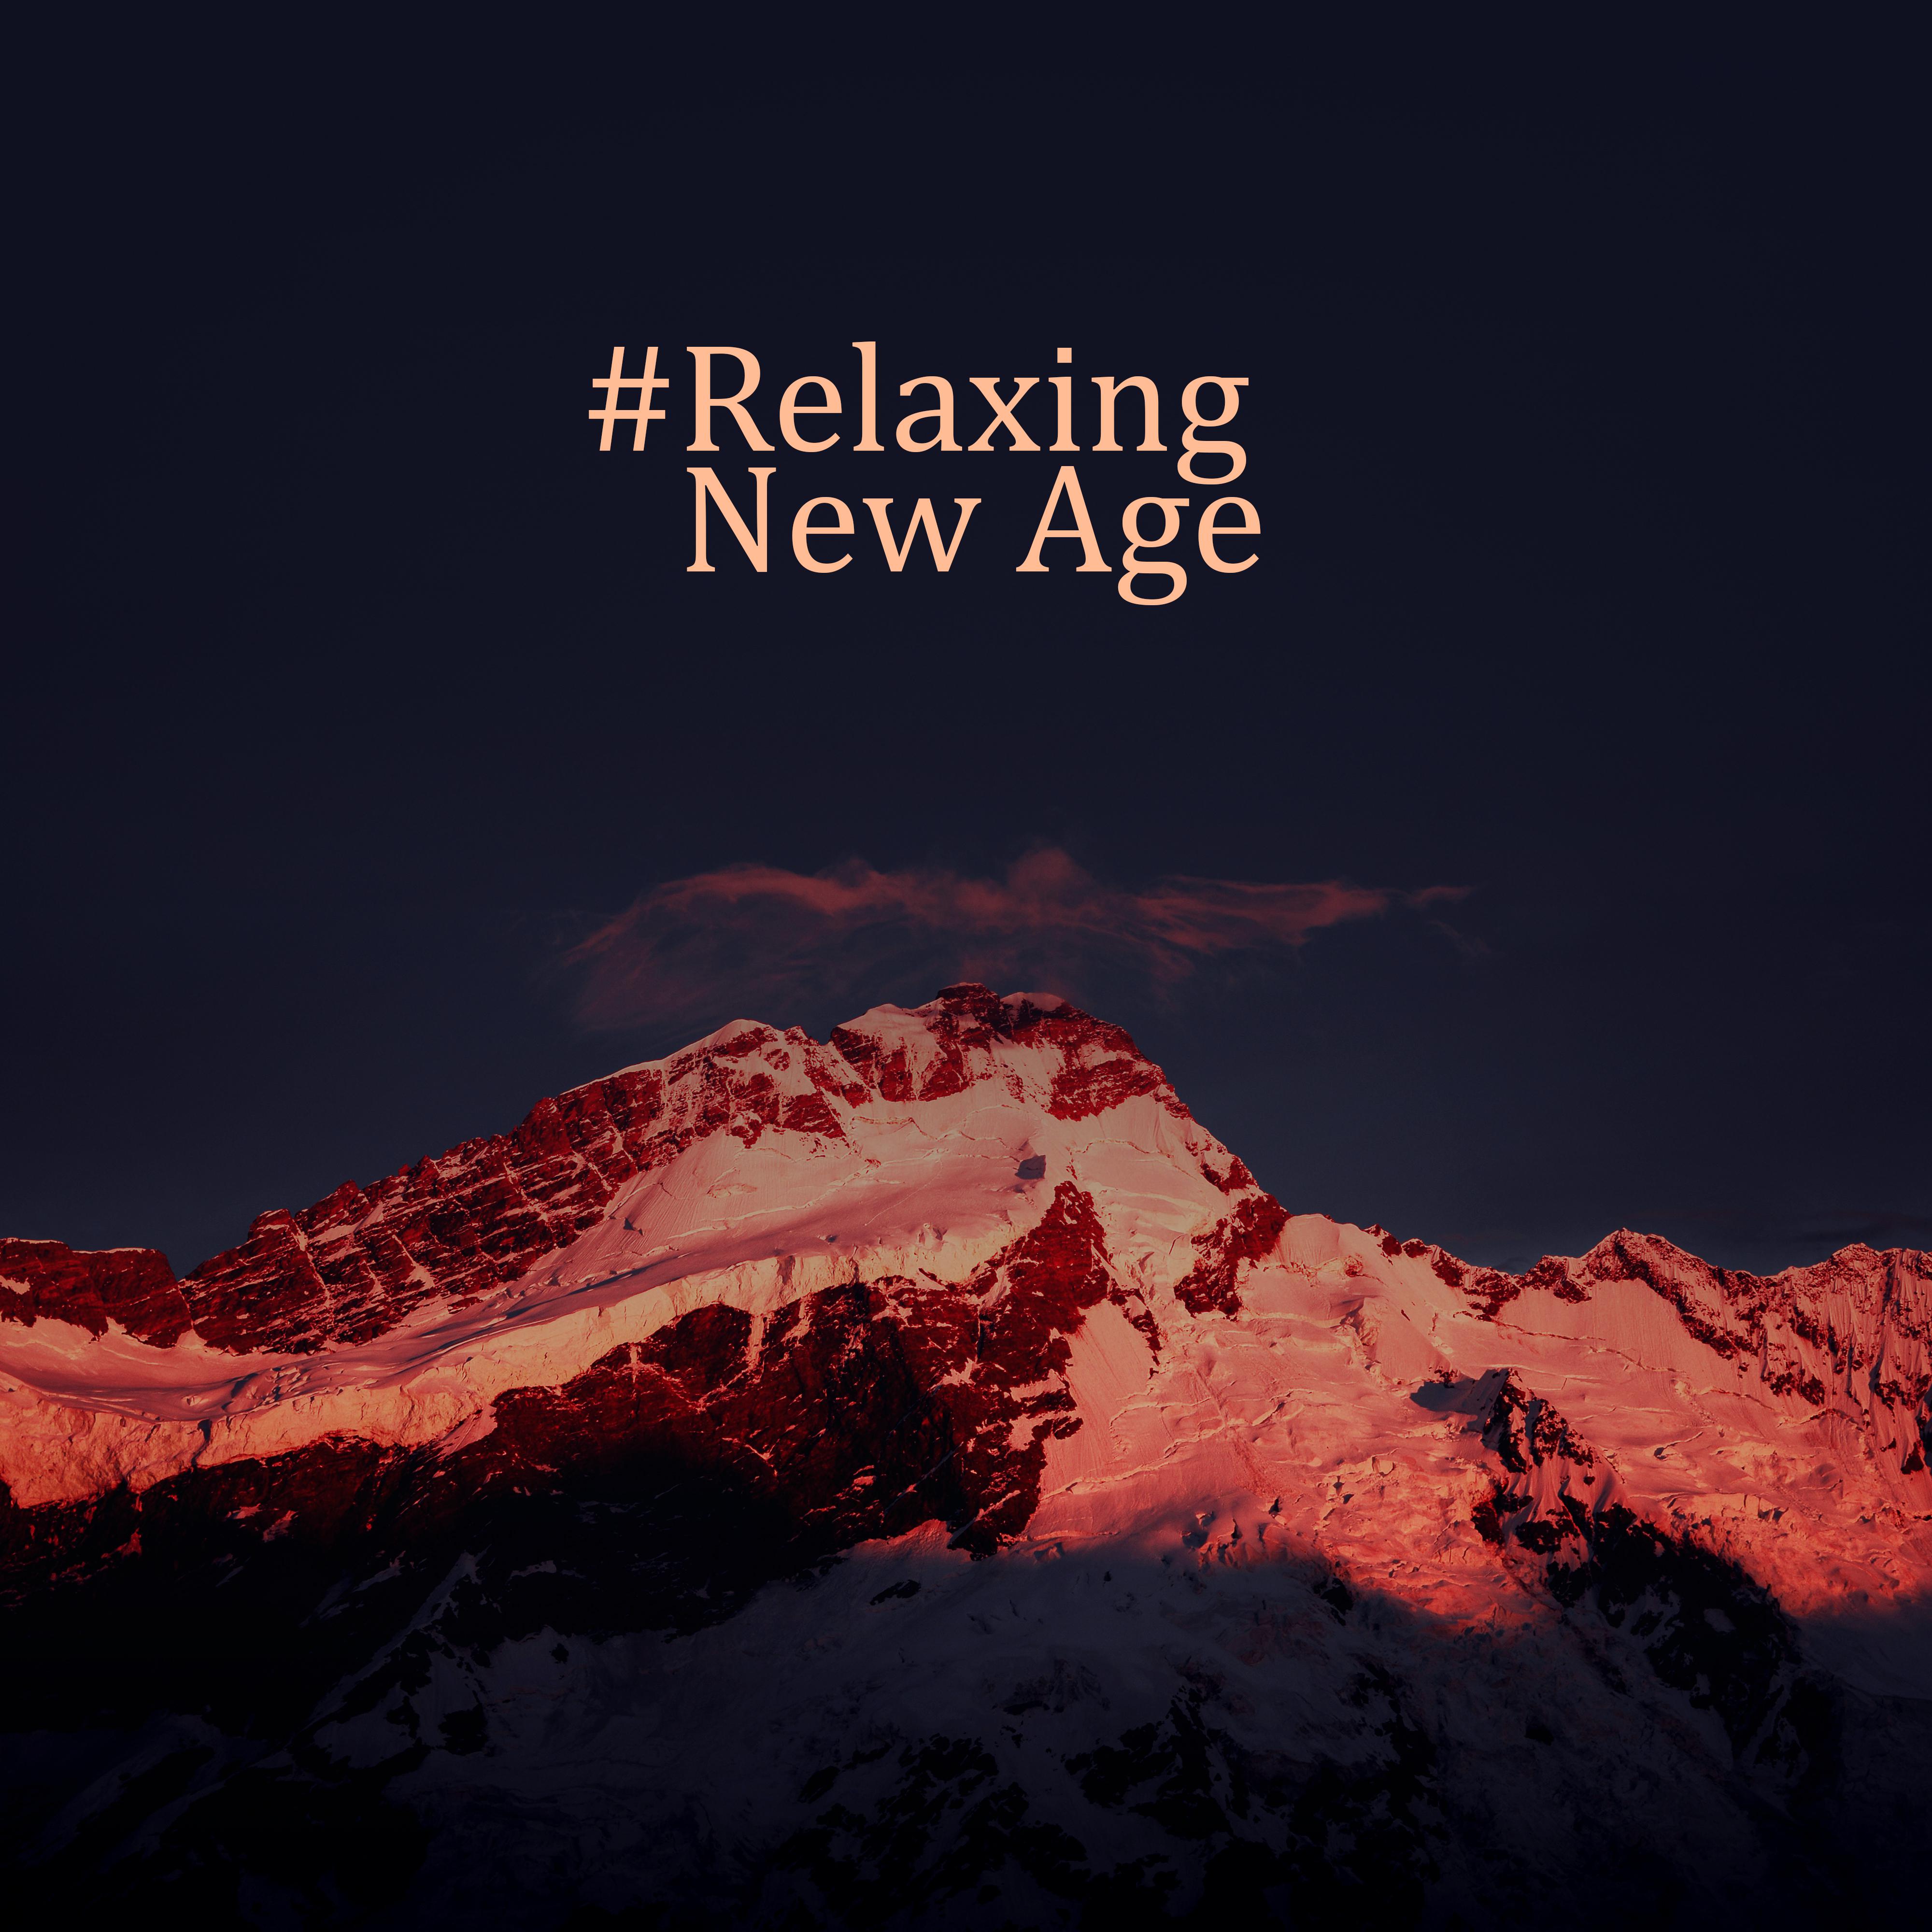 #Relaxing New Age